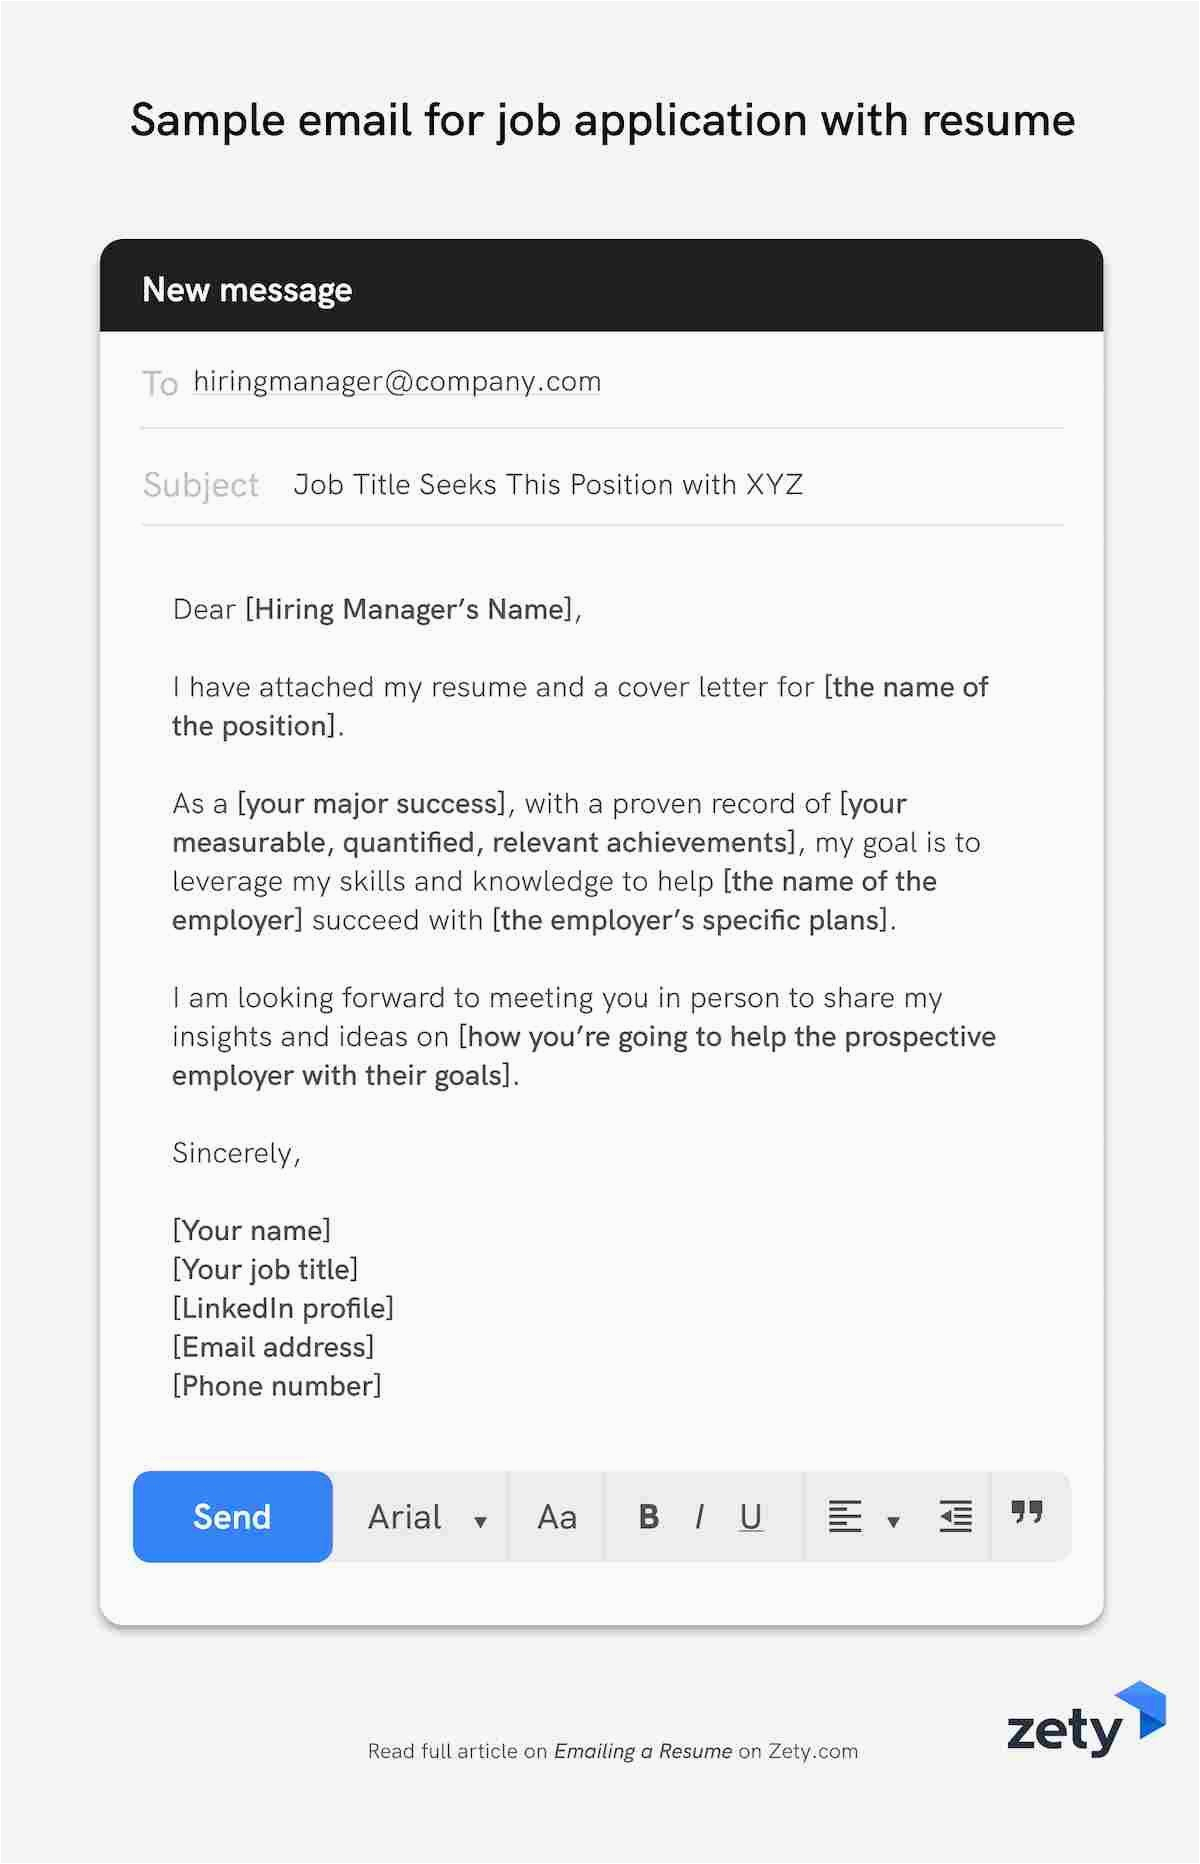 Sample Message to Employer with Resume How to Email A Resume to An Employer 12 Email Examples